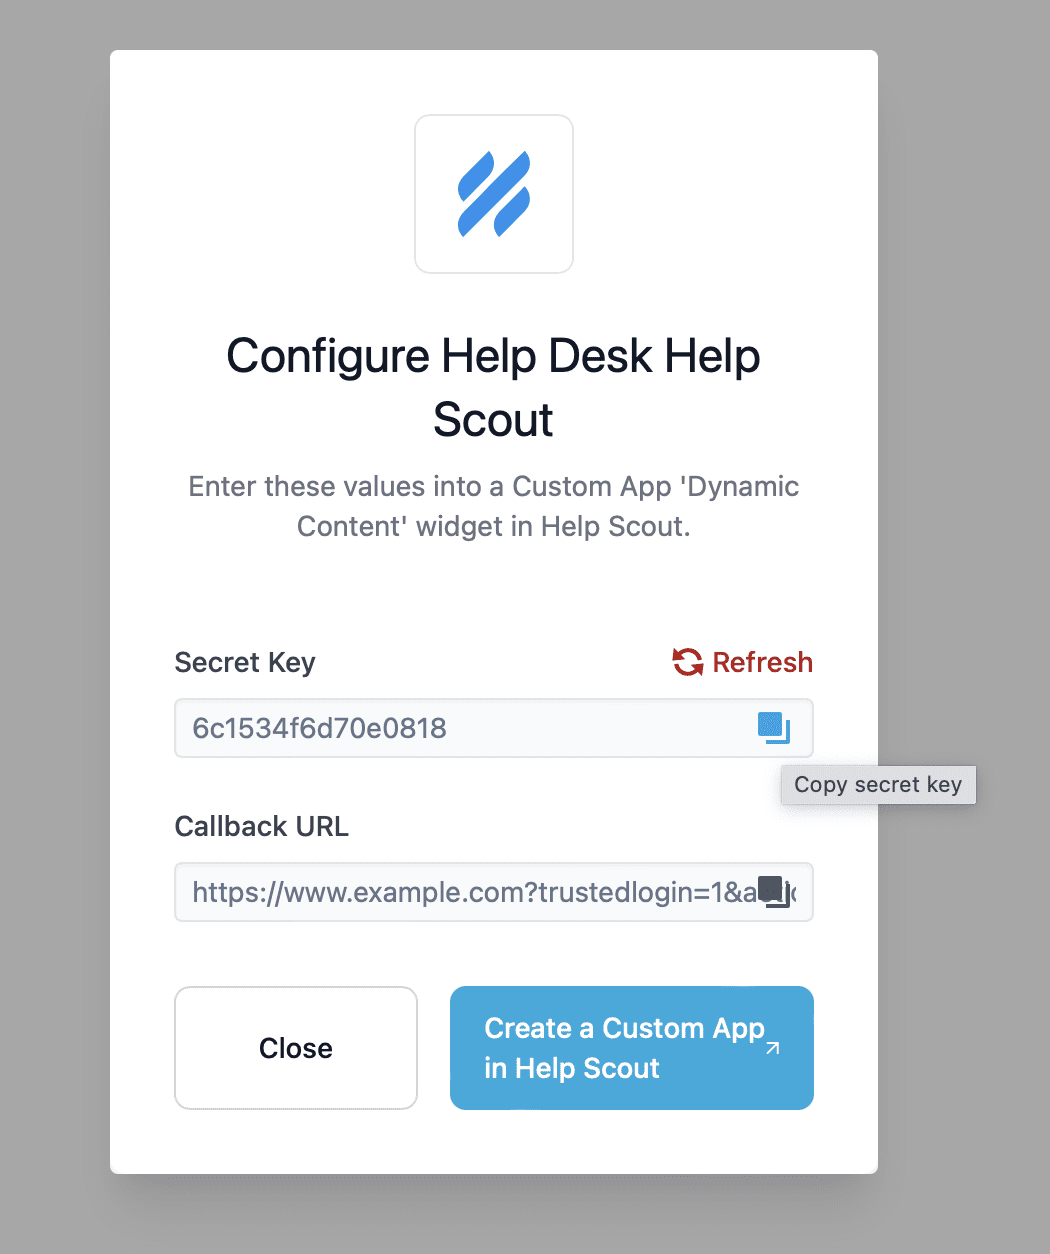 A modal showing the Secret Key and Callback URL fields, both with copy icons next to them